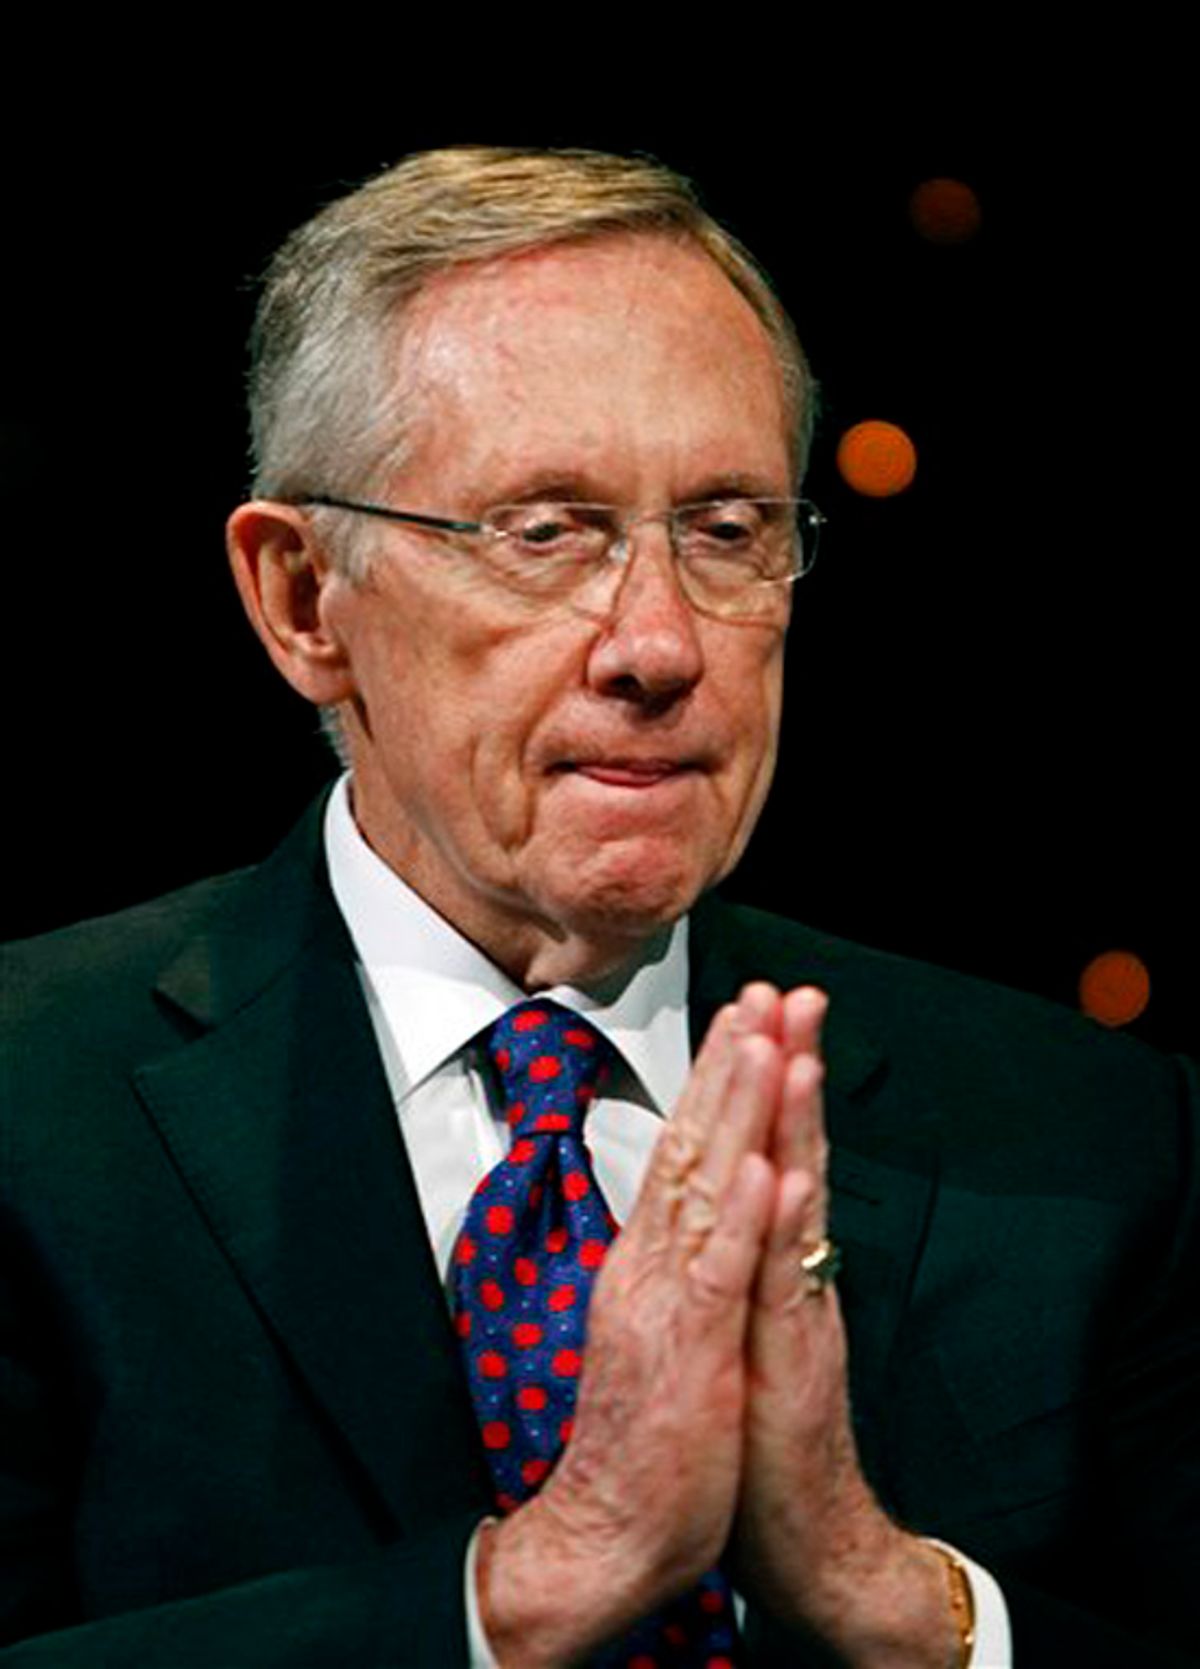 Sen. Harry Reid answers questions during the Netroots Nation convention at the Rio Hotel and Casino in Las Vegas on Saturday, July 24, 2010. Reid faces Republican and tea party favorite Sharron Angle this November in his bid to keep representing Nevada. (AP Photo/Louie Traub) (Louie Traub)